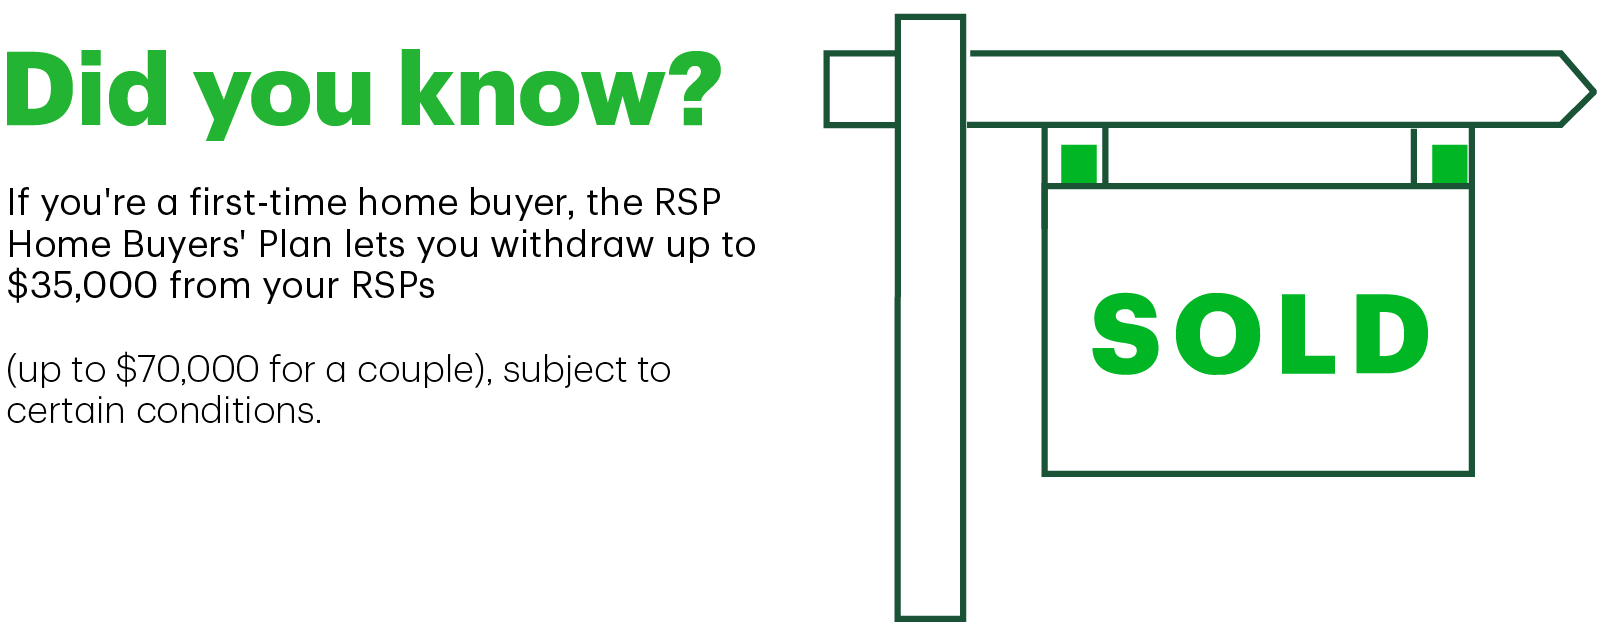 If you're a first-time home buyer, the RSP Home Buyers' Plan lets you withdraw up to $35,000 from your RSPs (up to $70,000 for a couple), subject to eligibility and certain conditions.